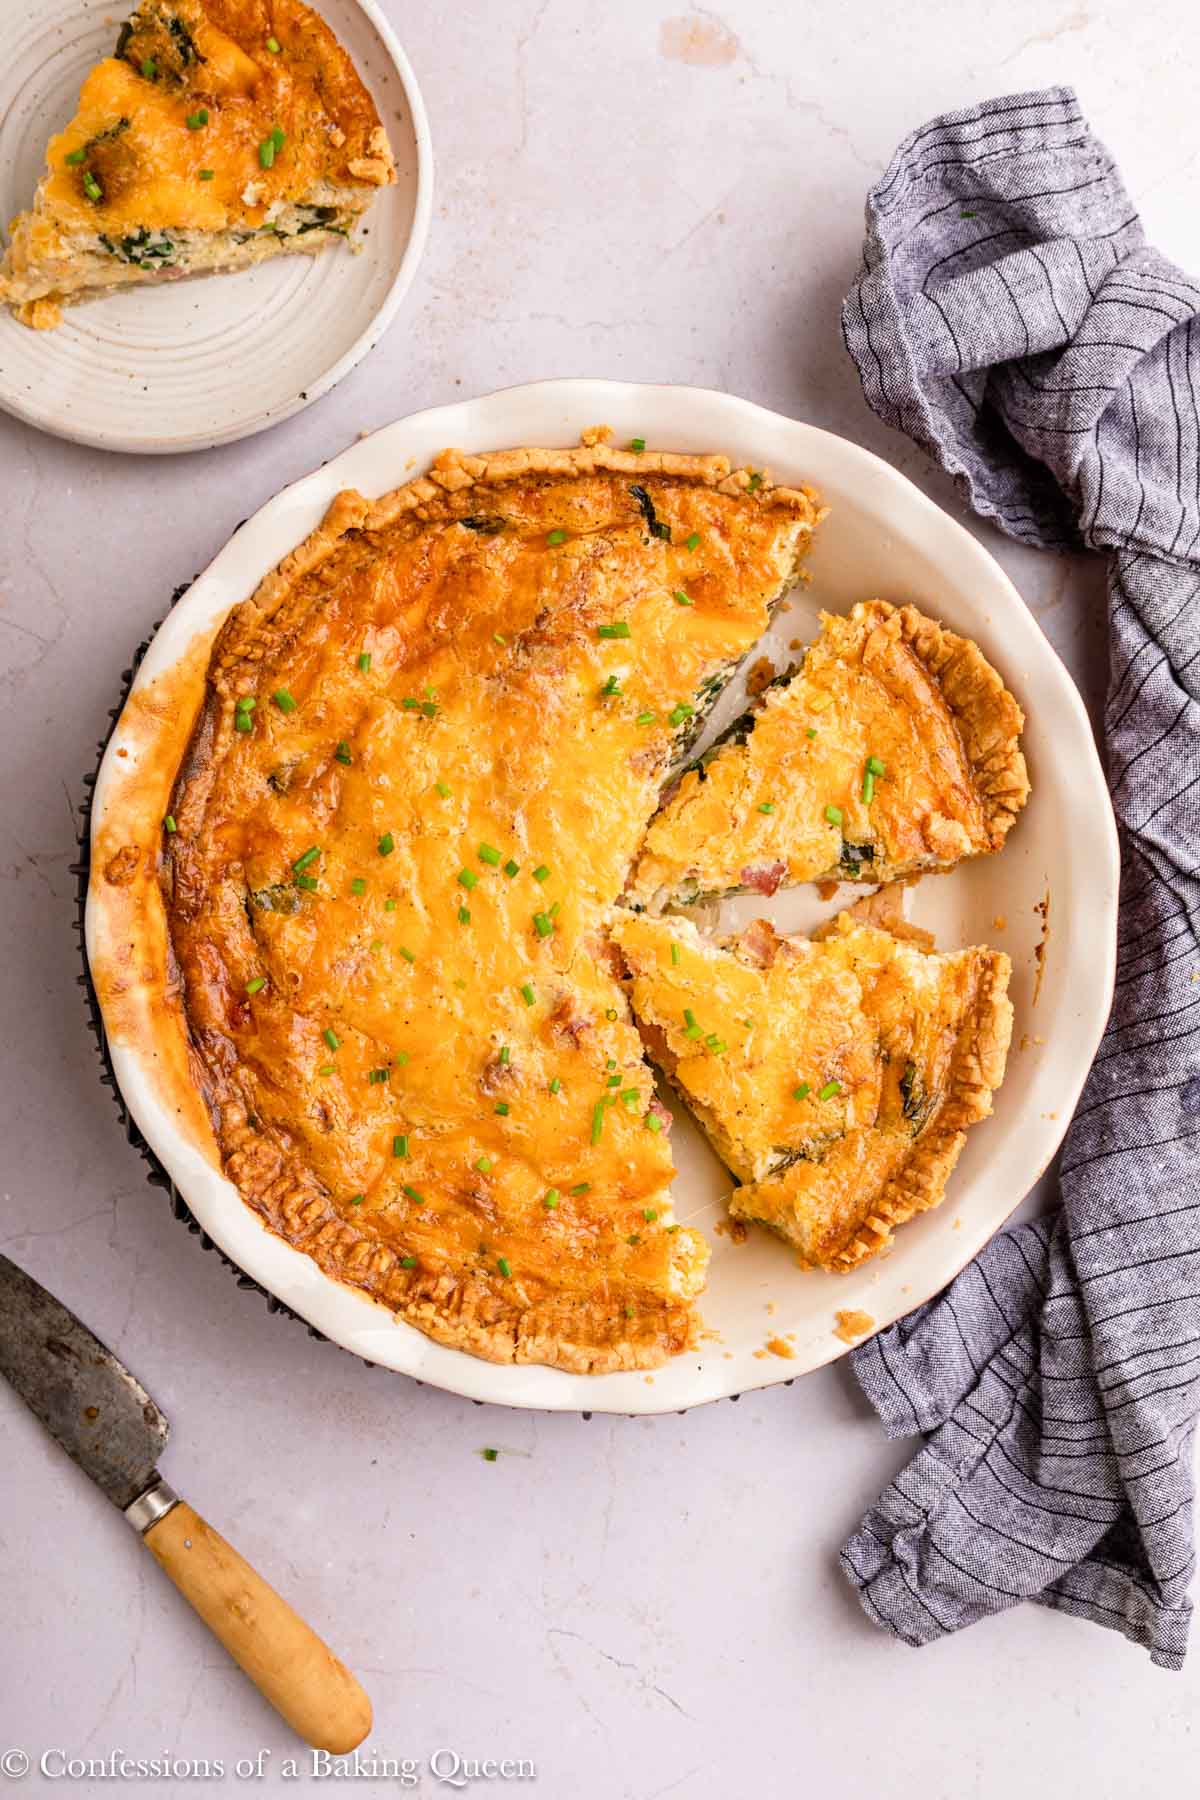 cut up bacon cheddar quiche in a white pie dish with a wooden knife on a light surface with a blue linen.